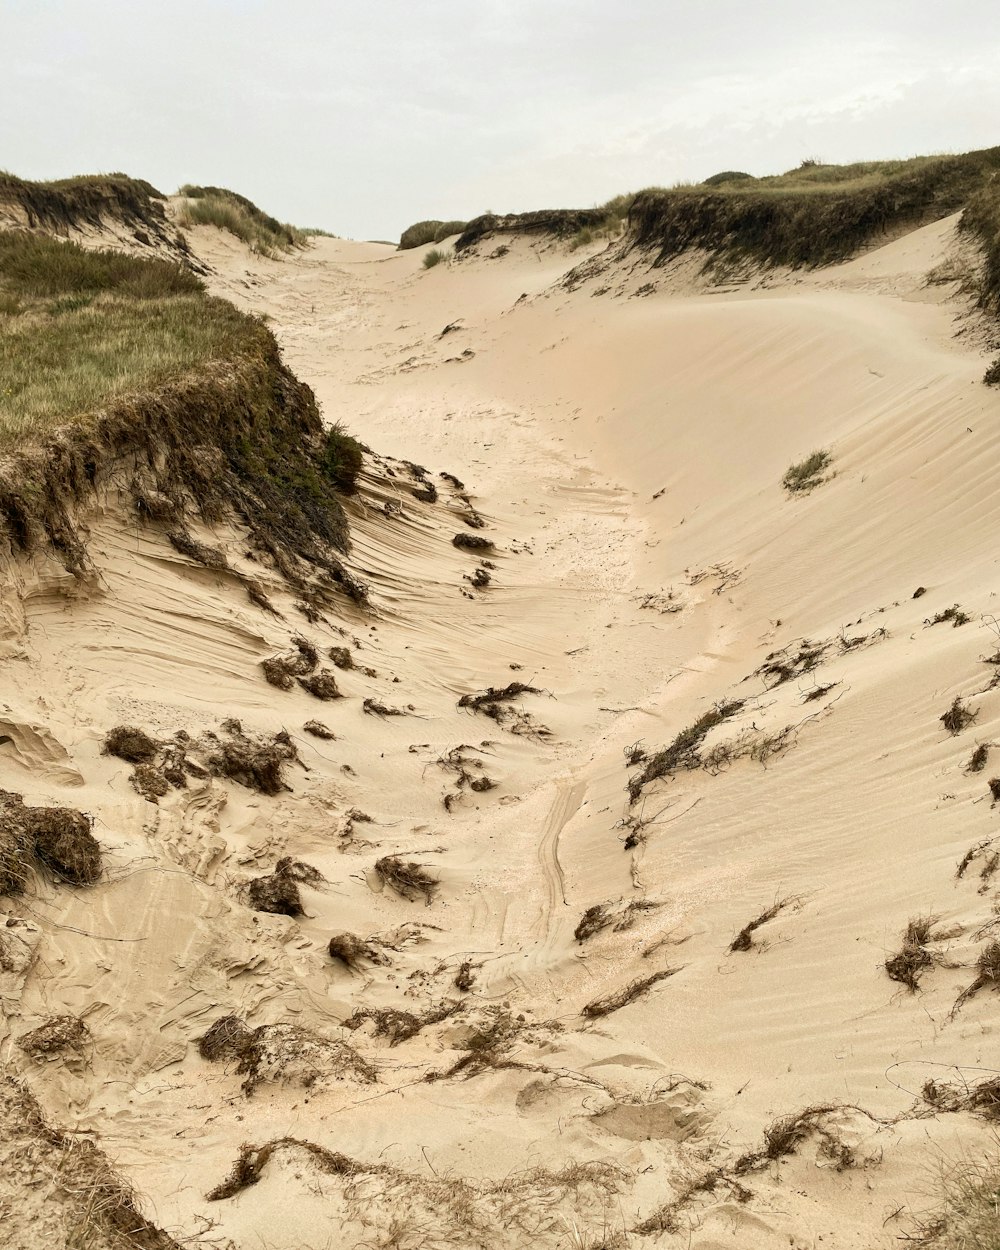 a sandy beach with a grassy hill in the background